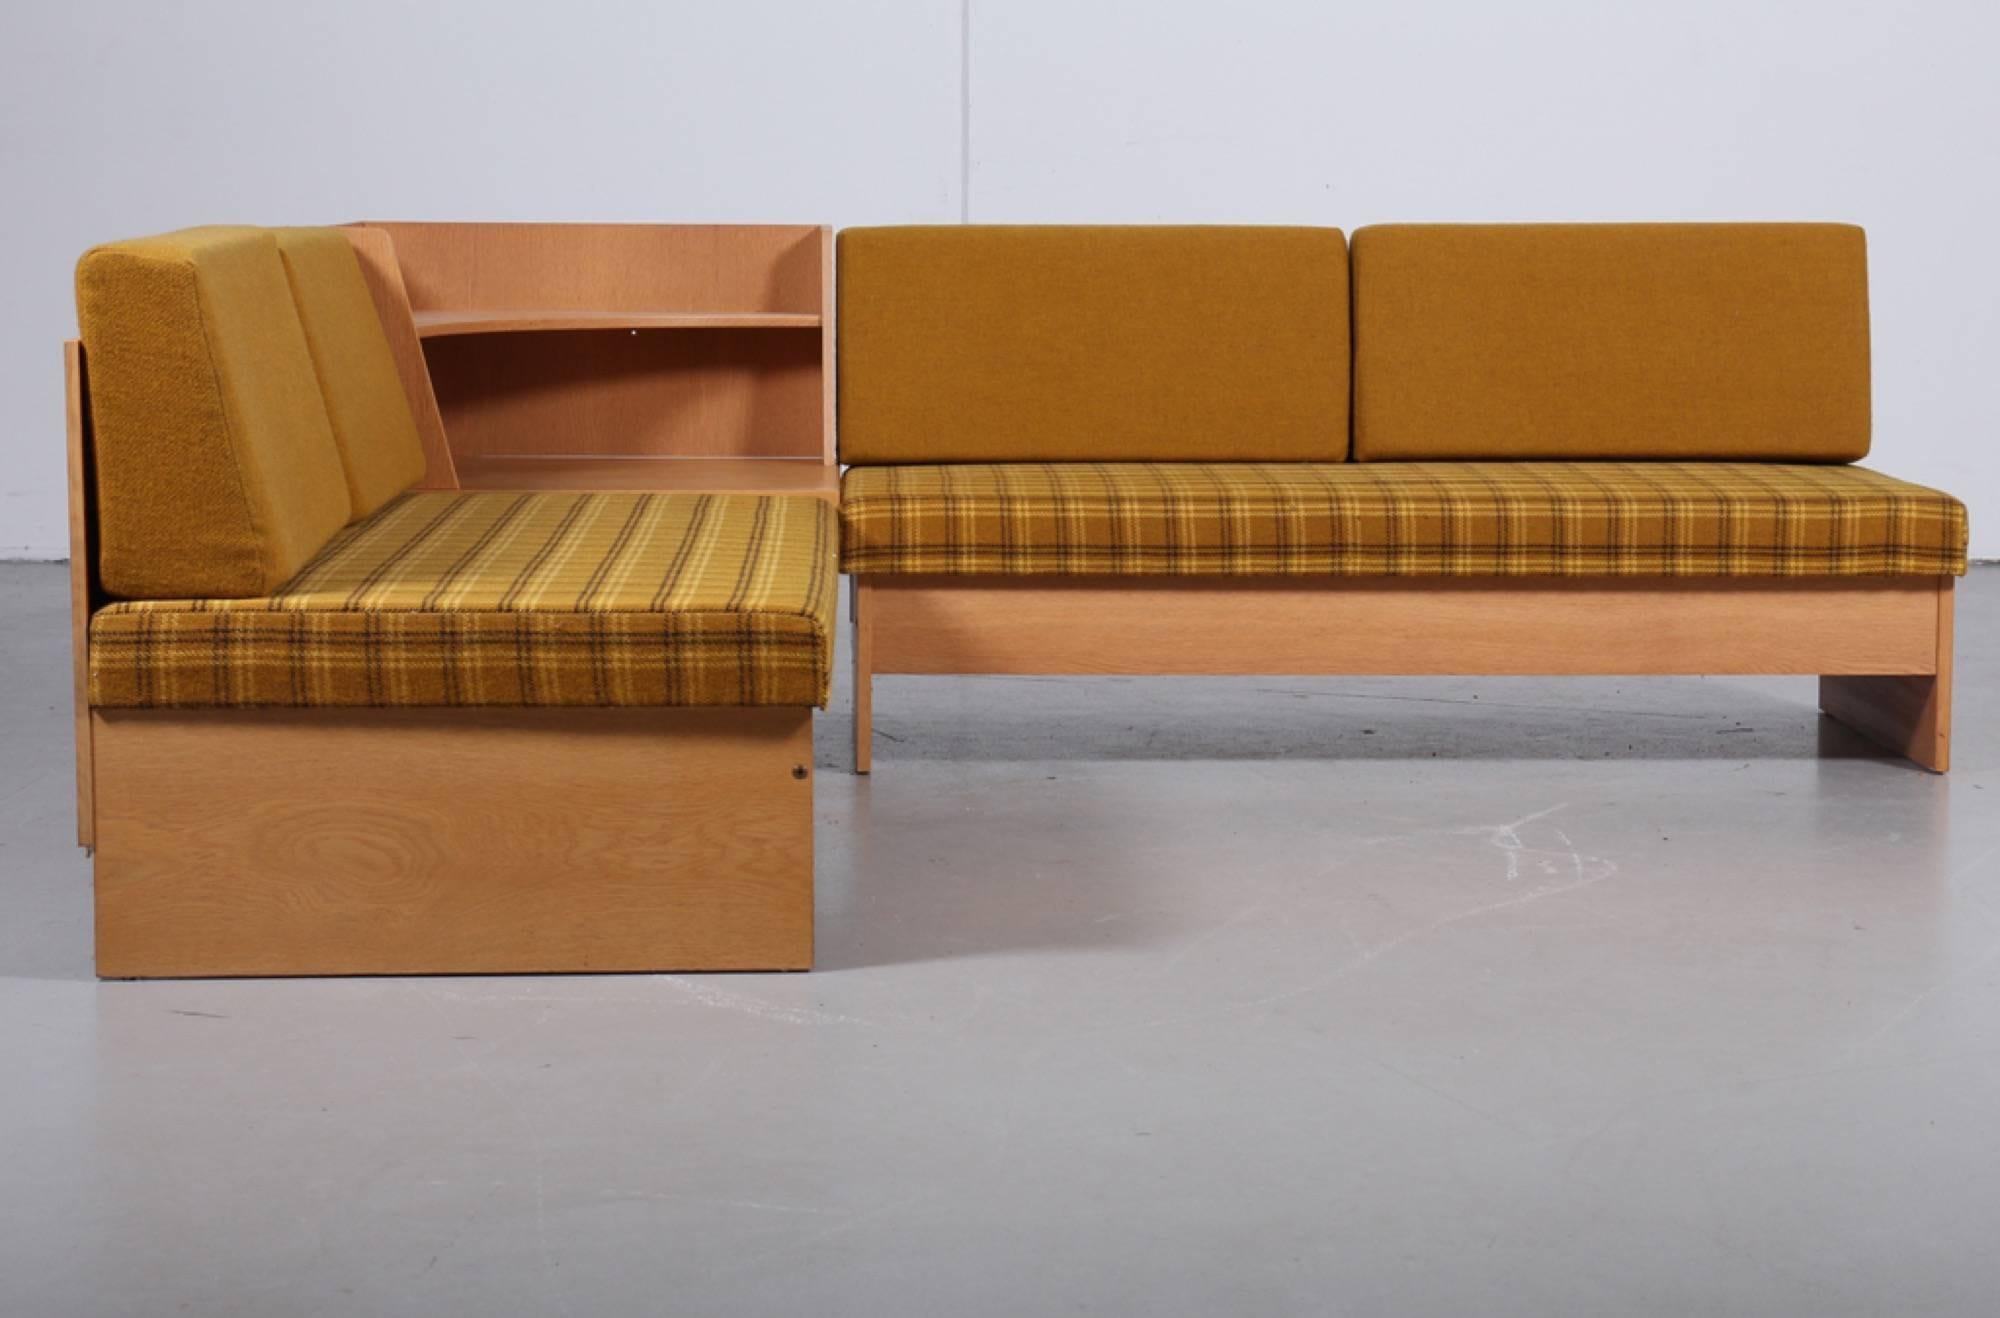 'Swan' corner sofa and armchair from Ekornes, Norway, 1970s. Made of lacquered oak, each covered with checkered wool, loose cushions, corner table, and storage above table. Measures: Chair H. 72/38. B. 65. D. 75 cm. Corner sofa H. 75/38. L. 226/226.